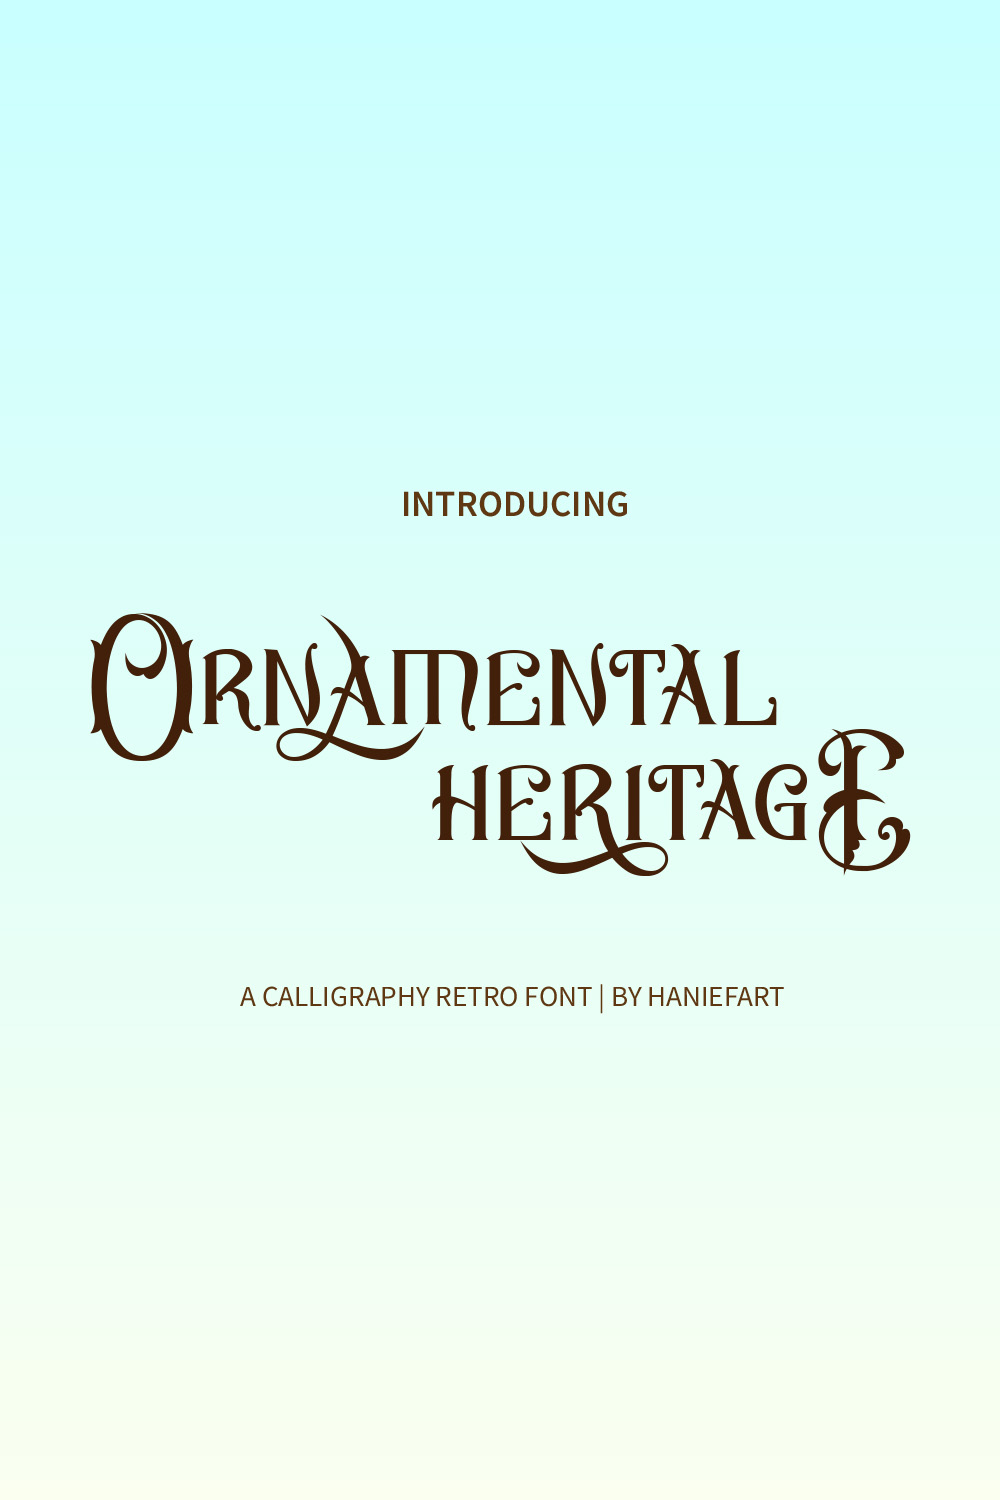 Ornamental Heritage pinterest preview image.